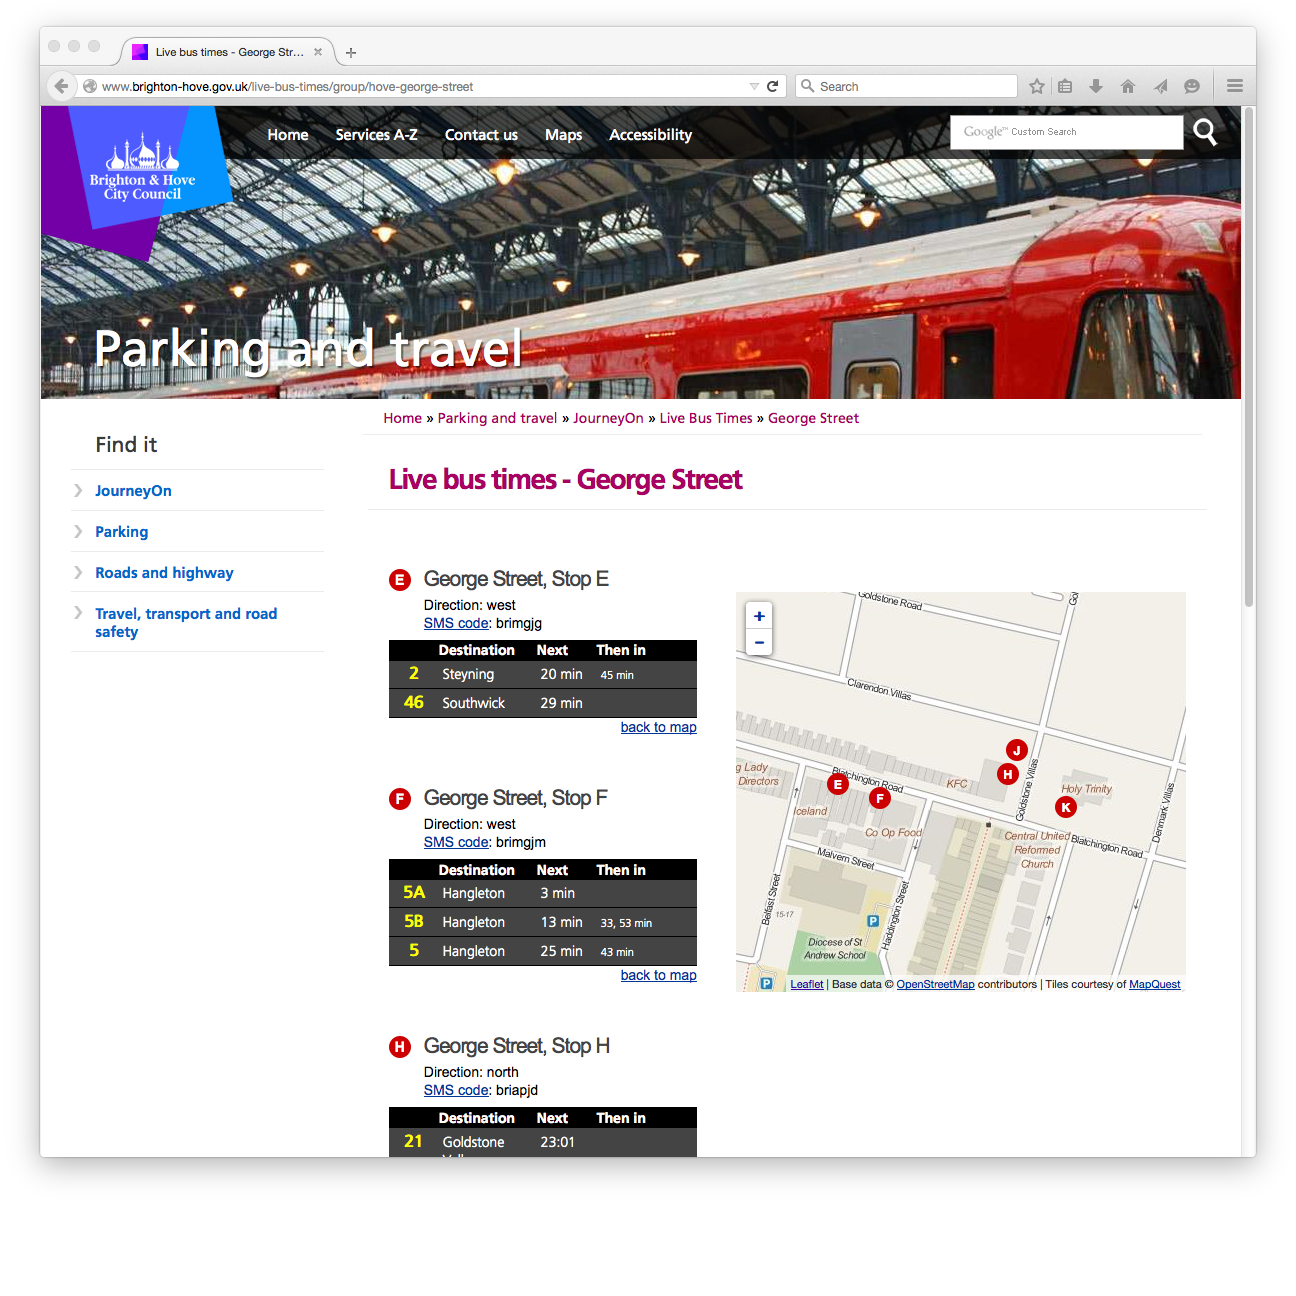 A screenshot of the live bus times page for George Street in Hove